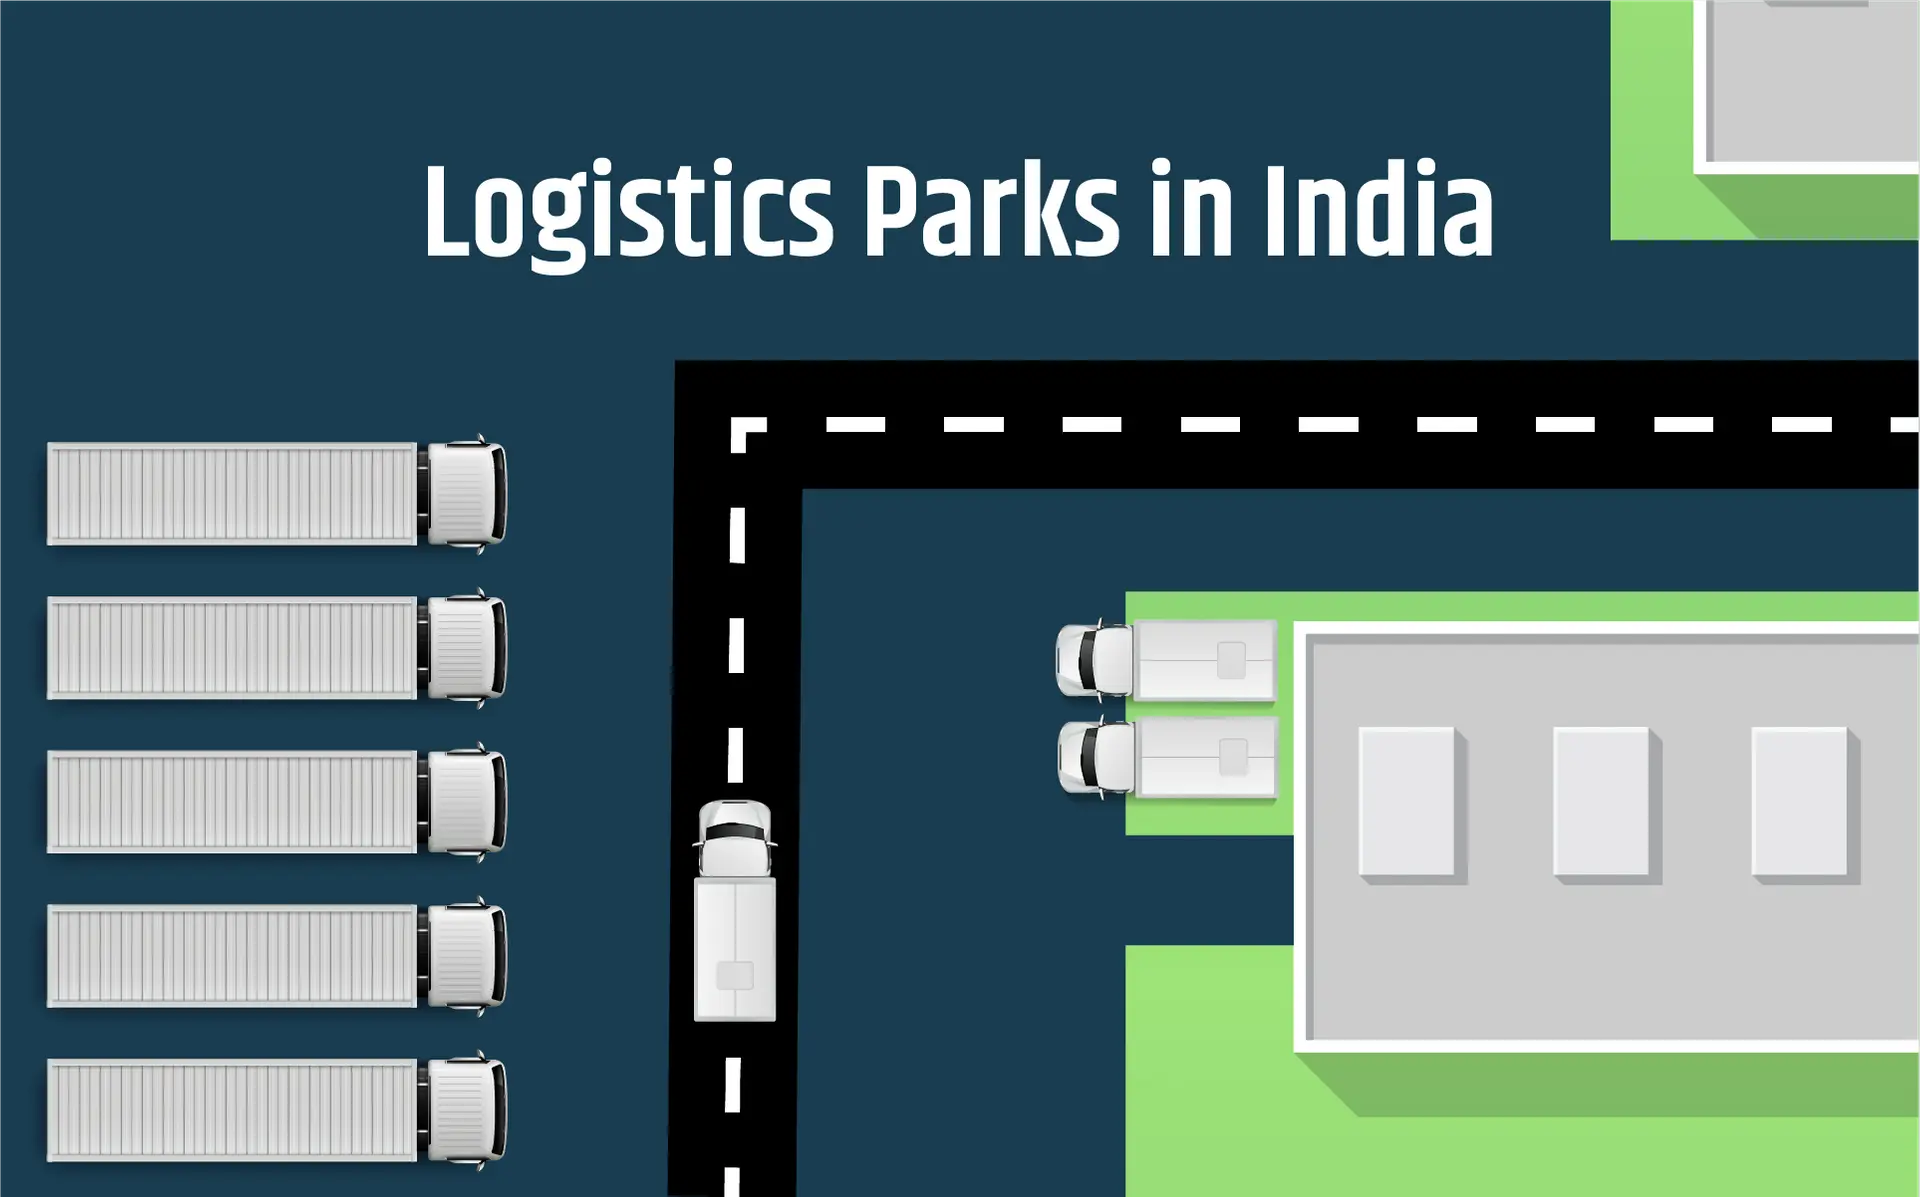 What Is a Logistics Park and What Purpose Does It Serve?